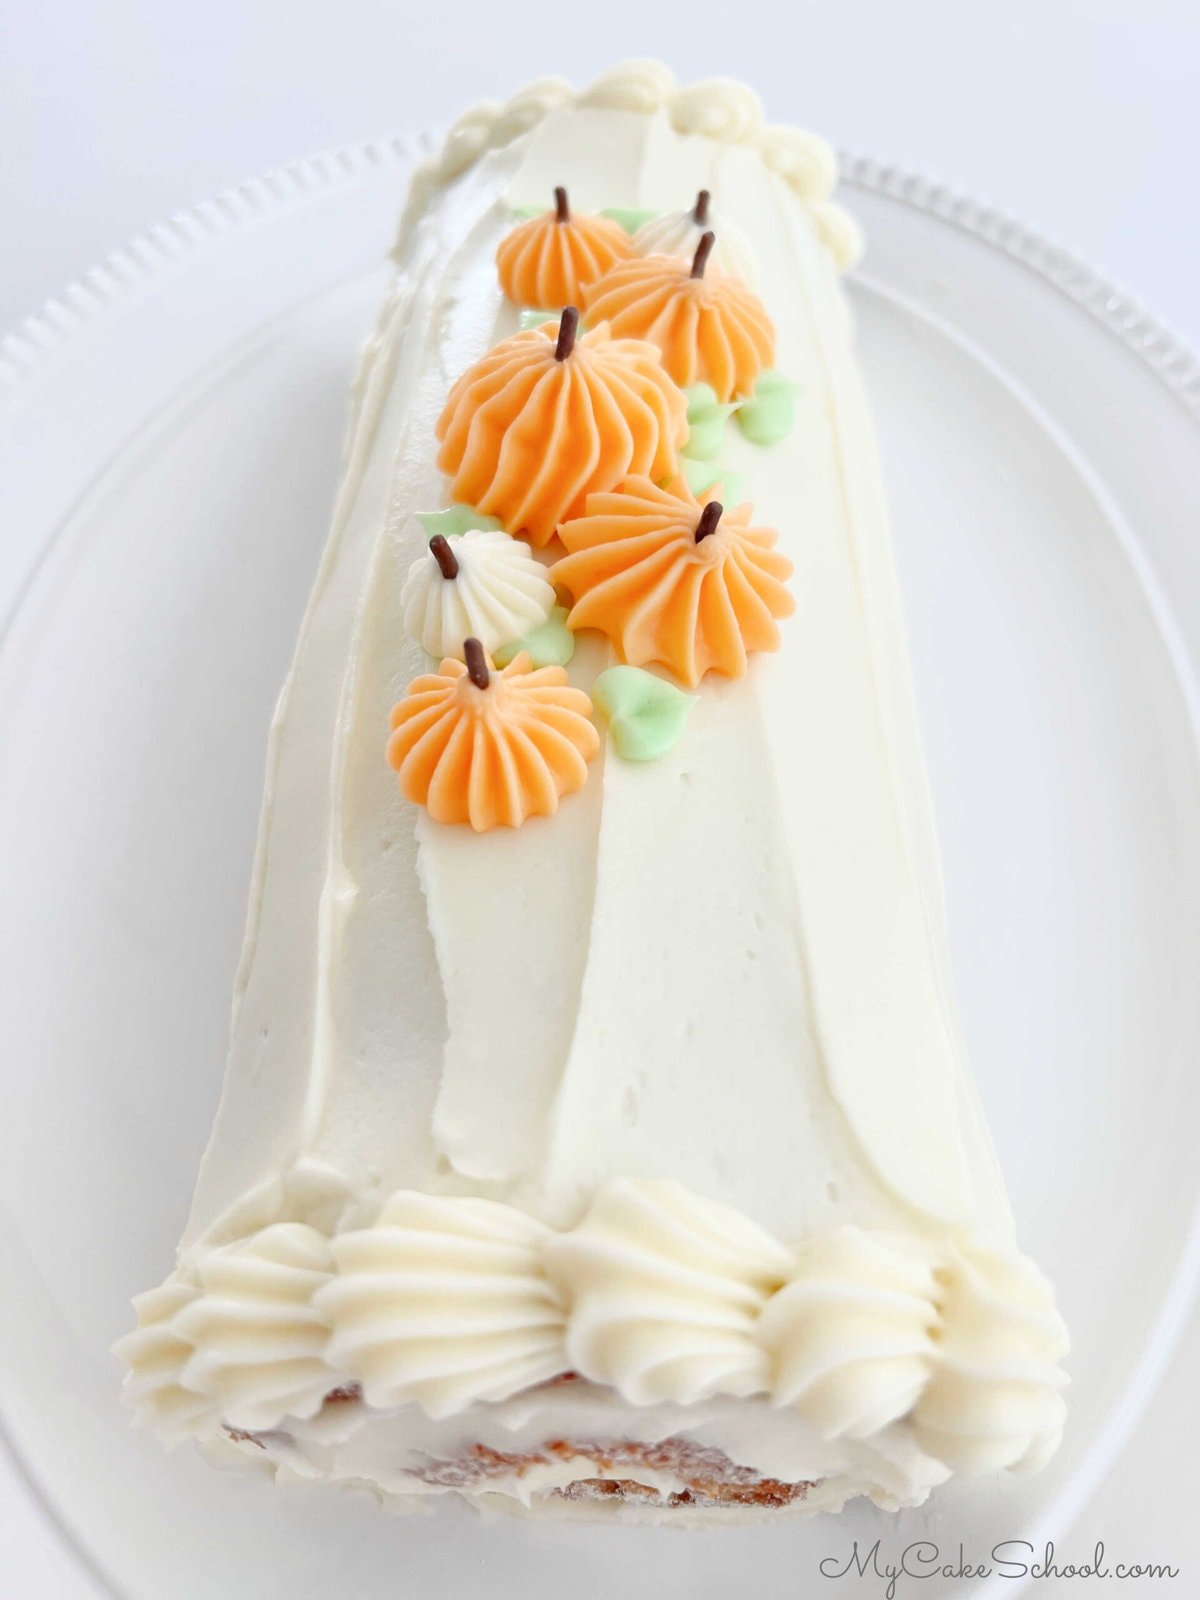 Pumpkin Roll Cake frosted with cream cheese frosting and topped with piped frosting pumpkins.